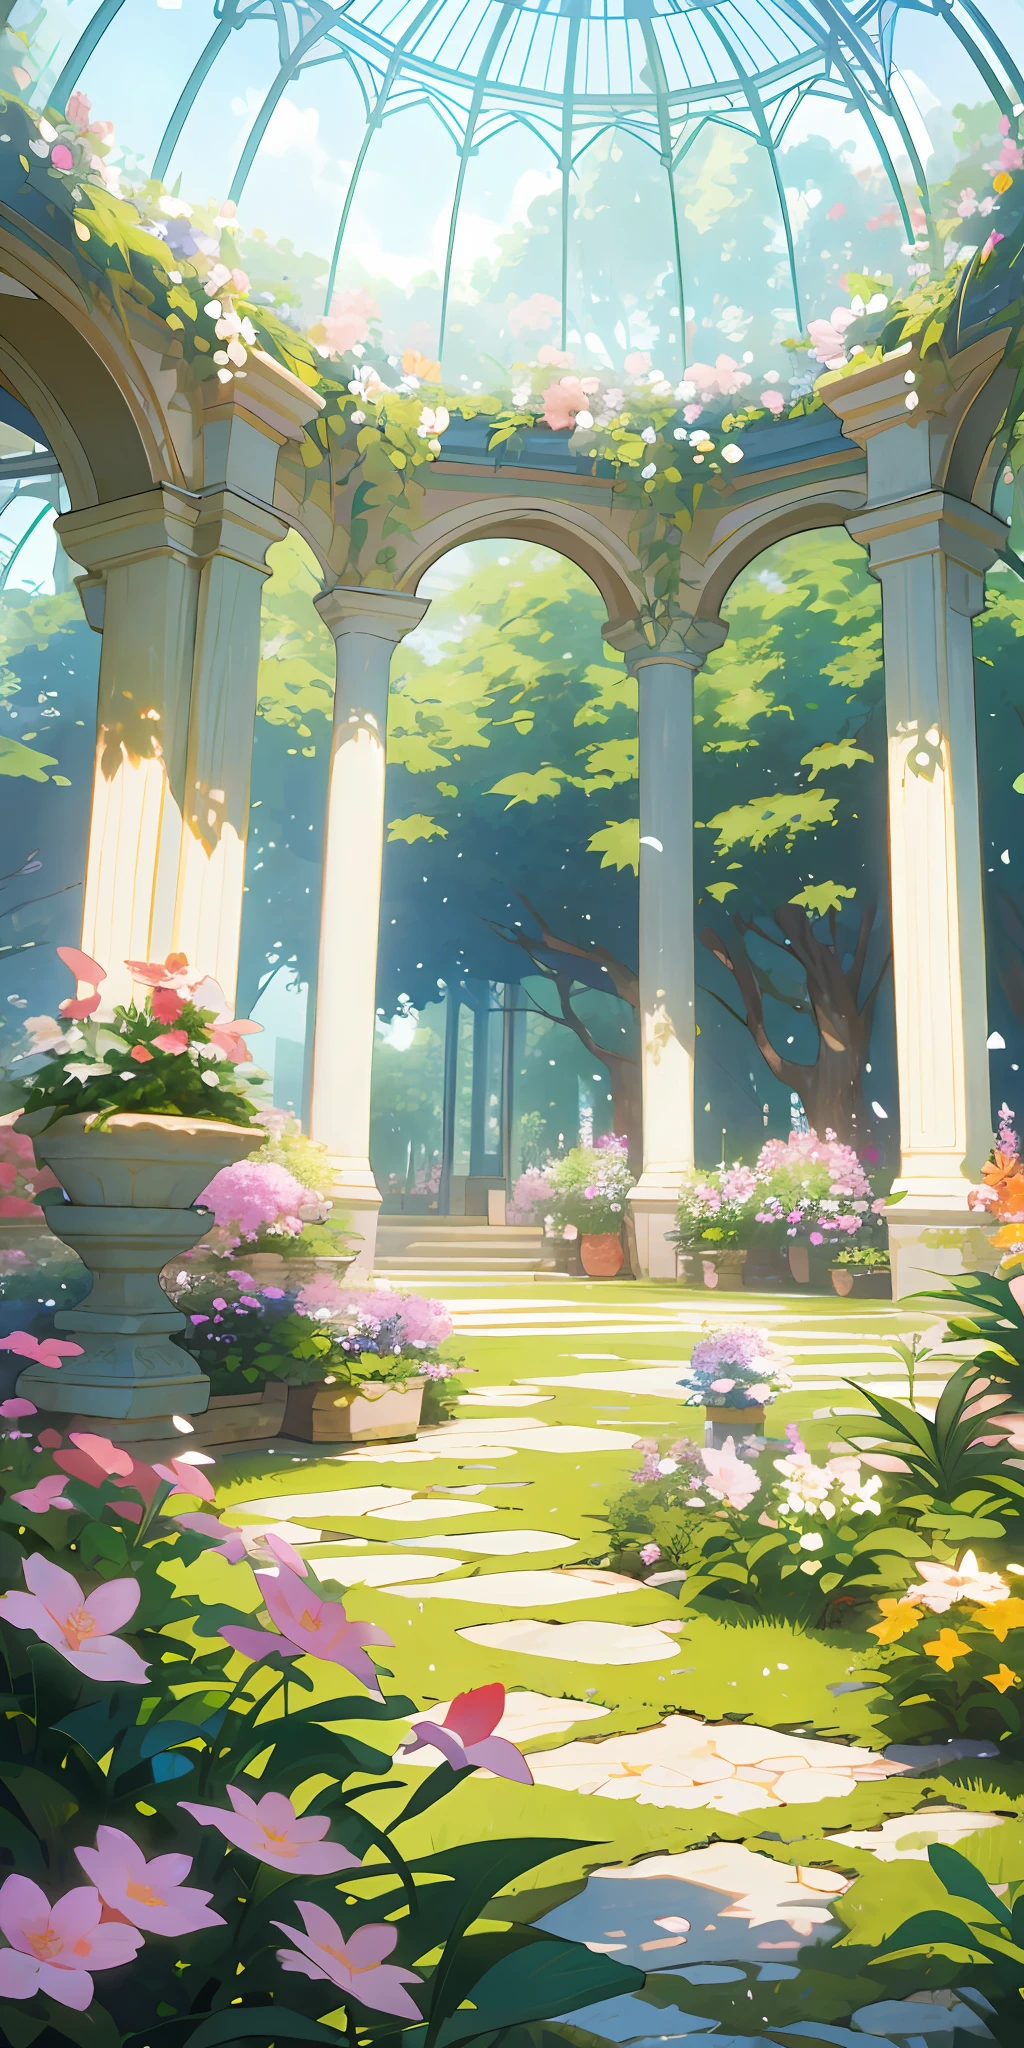 (top quality, masterpiece, ultra-real), indoor botanical garden, dome, lots of flowers, dense mass of plants, the landscape in the background is a garden with petals and puffs flying around. --v6